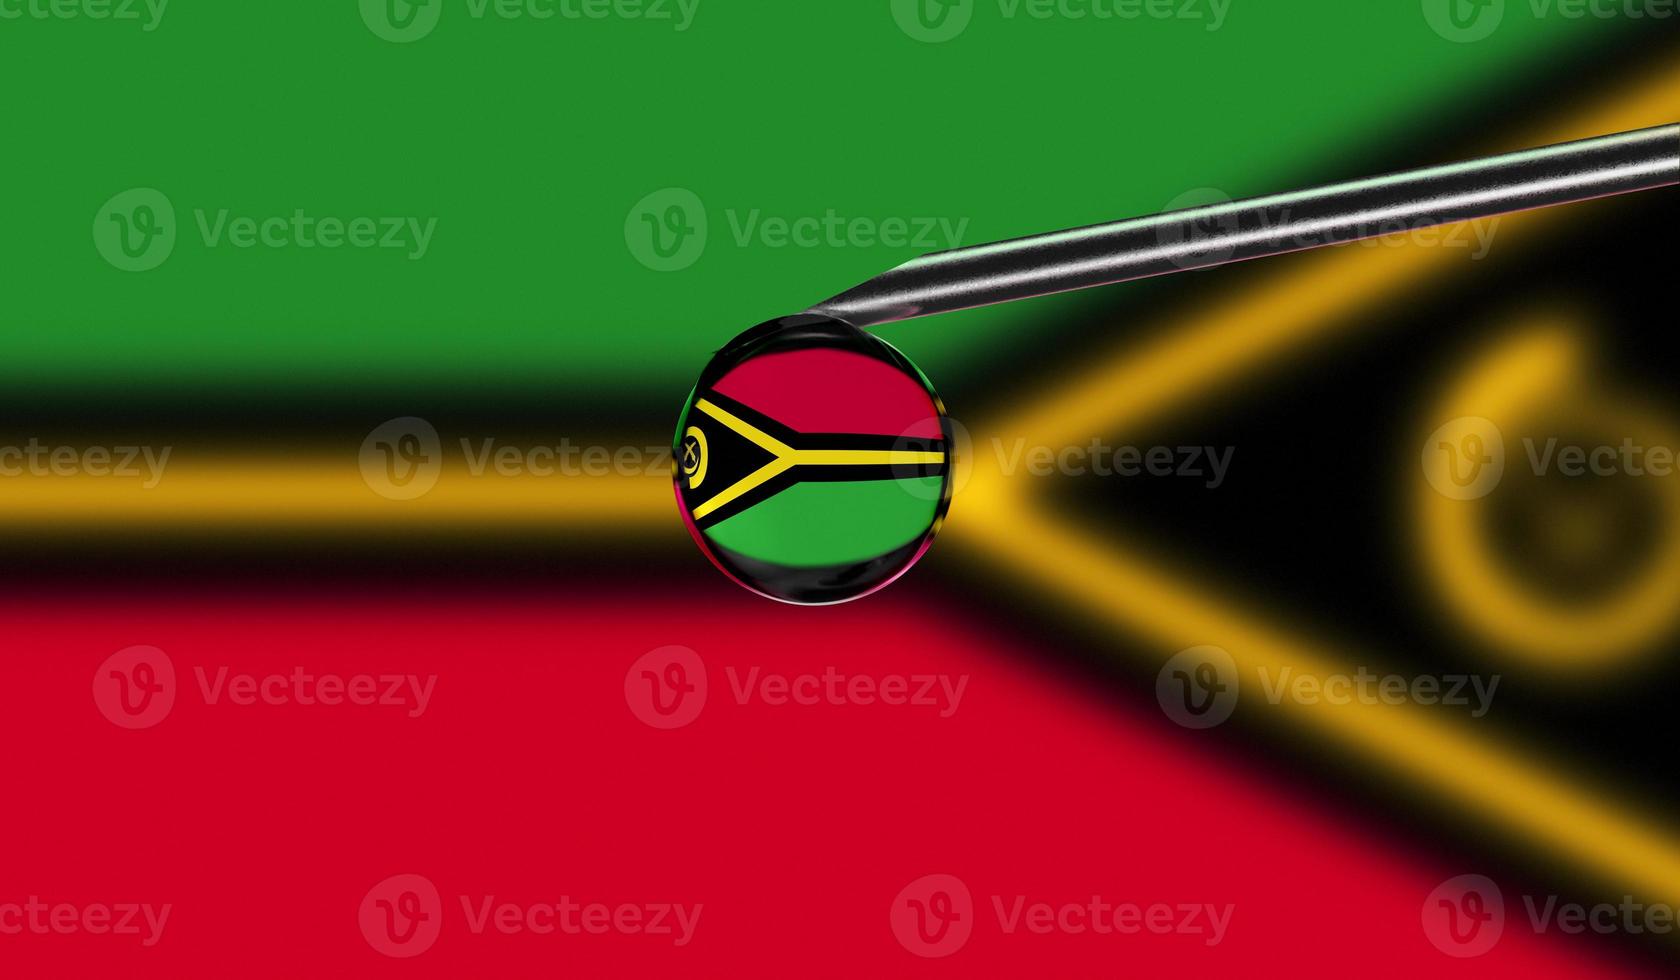 Vaccine syringe with drop on needle against national flag of Vanuatu background. Medical concept vaccination. Coronavirus Sars-Cov-2 pandemic protection. National safety idea. photo